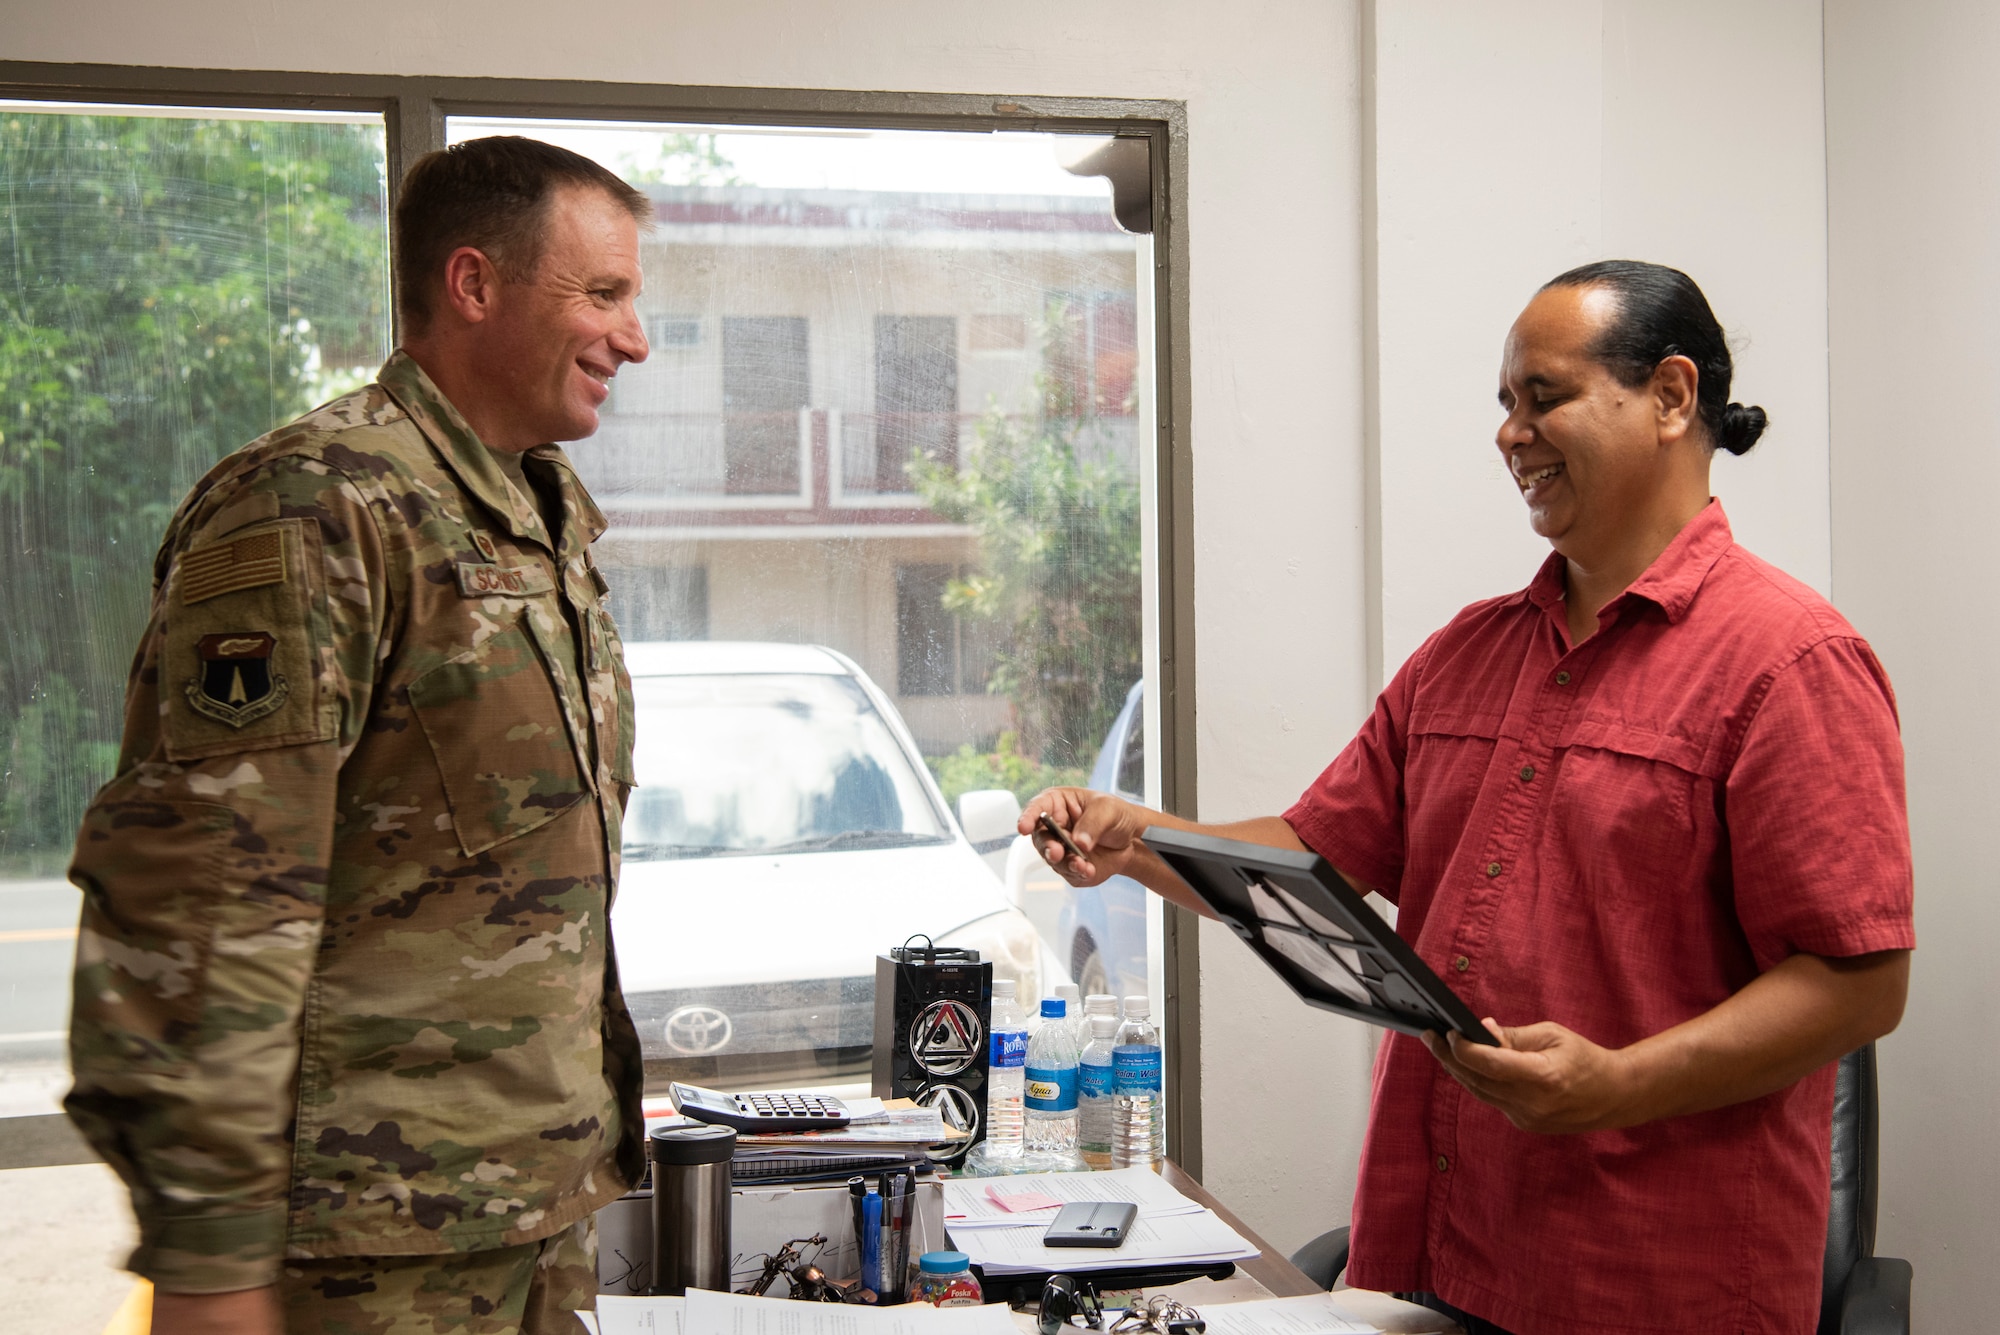 U.S. Air Force Col. R Schmidt, 36th Contingency Response Group commander, presents a signed photo and a commander’s coin to Kennosuke Suzuky, governor of Anguar, Palau during a key leader engagement in Palau, June 23, 2021. The purpose of the visit was for the commander of the 36th CRG, to meet with key leaders of Palau such as the ambassador, national security office coordinator, two governors, and to go on a walkthrough of some of the sites where his members are conducting training. (U.S. Air Force photo by Senior Airman Aubree Owens)